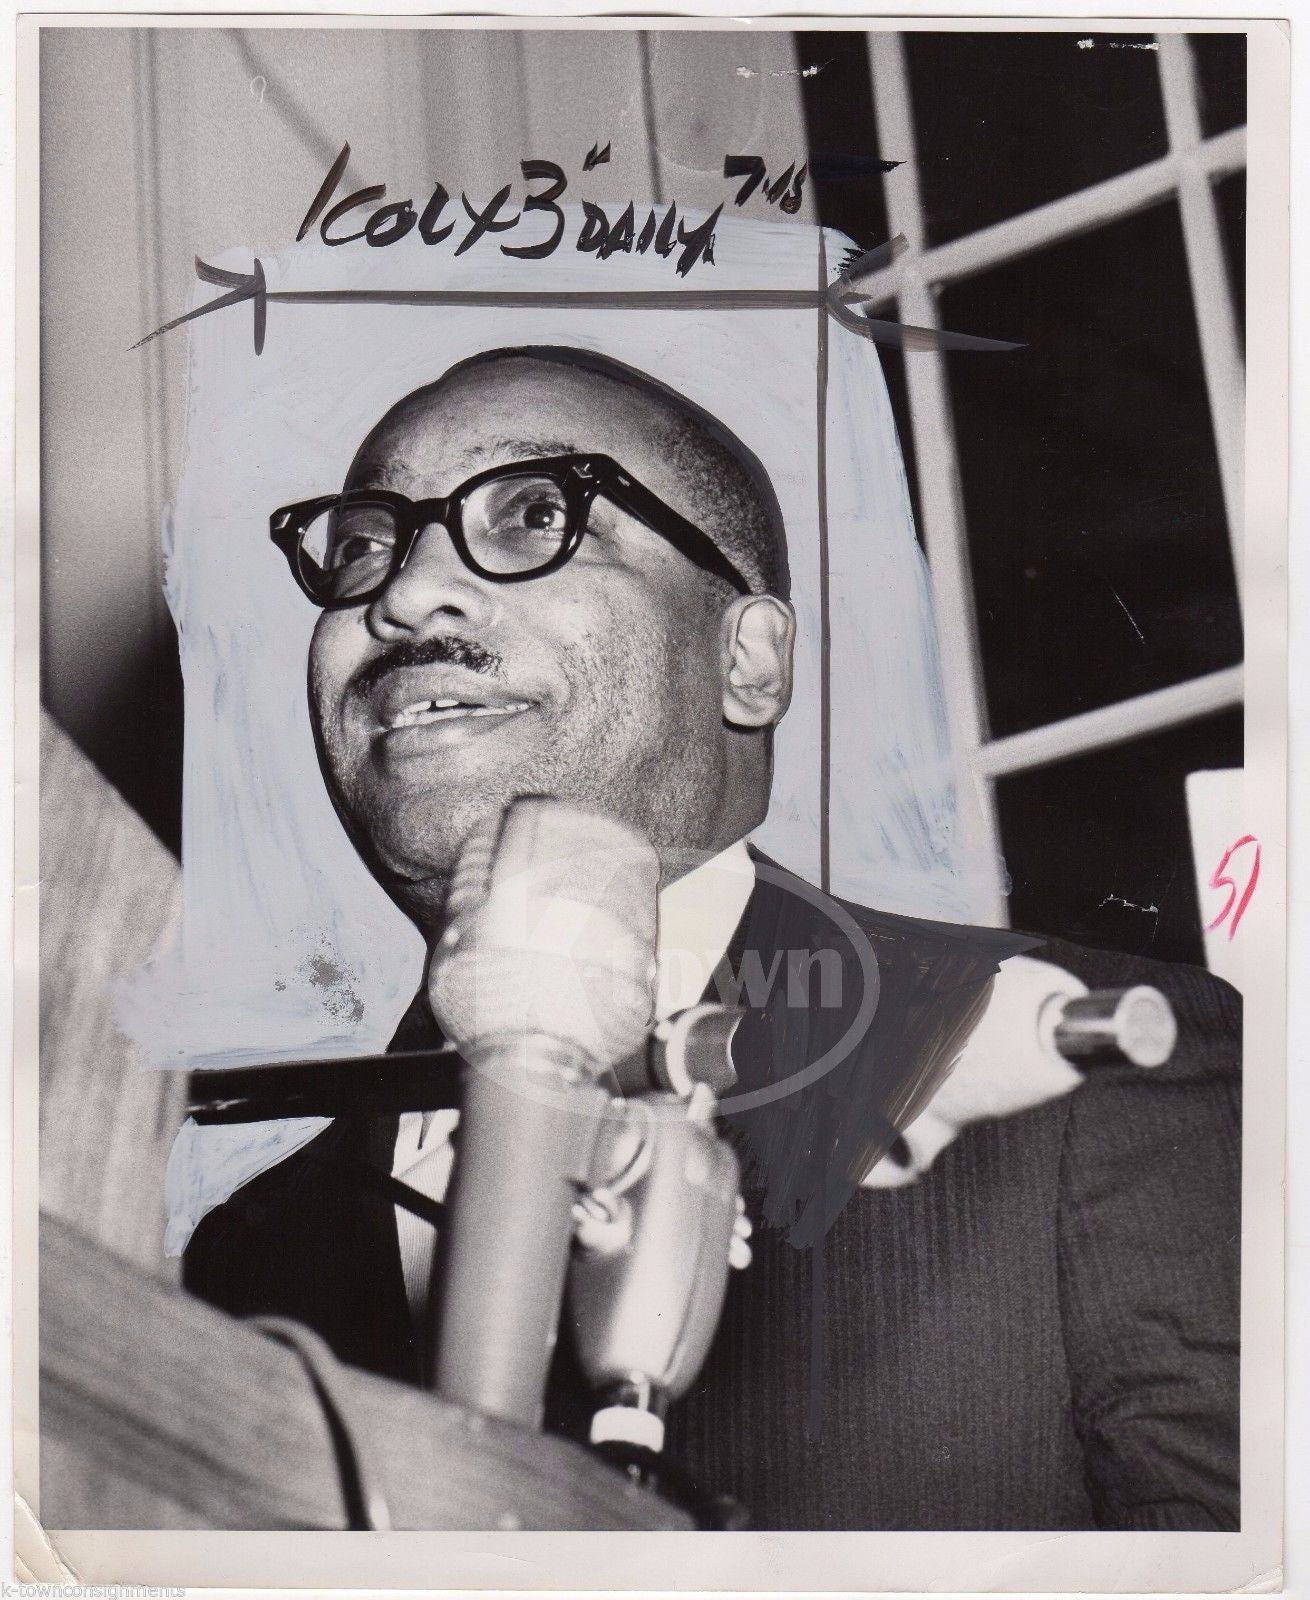 LOUIS LOMAX AFRICAN AMERICAN TV JOURNALIST VINTAGE NEWS PRESS PHOTO 1964 - K-townConsignments